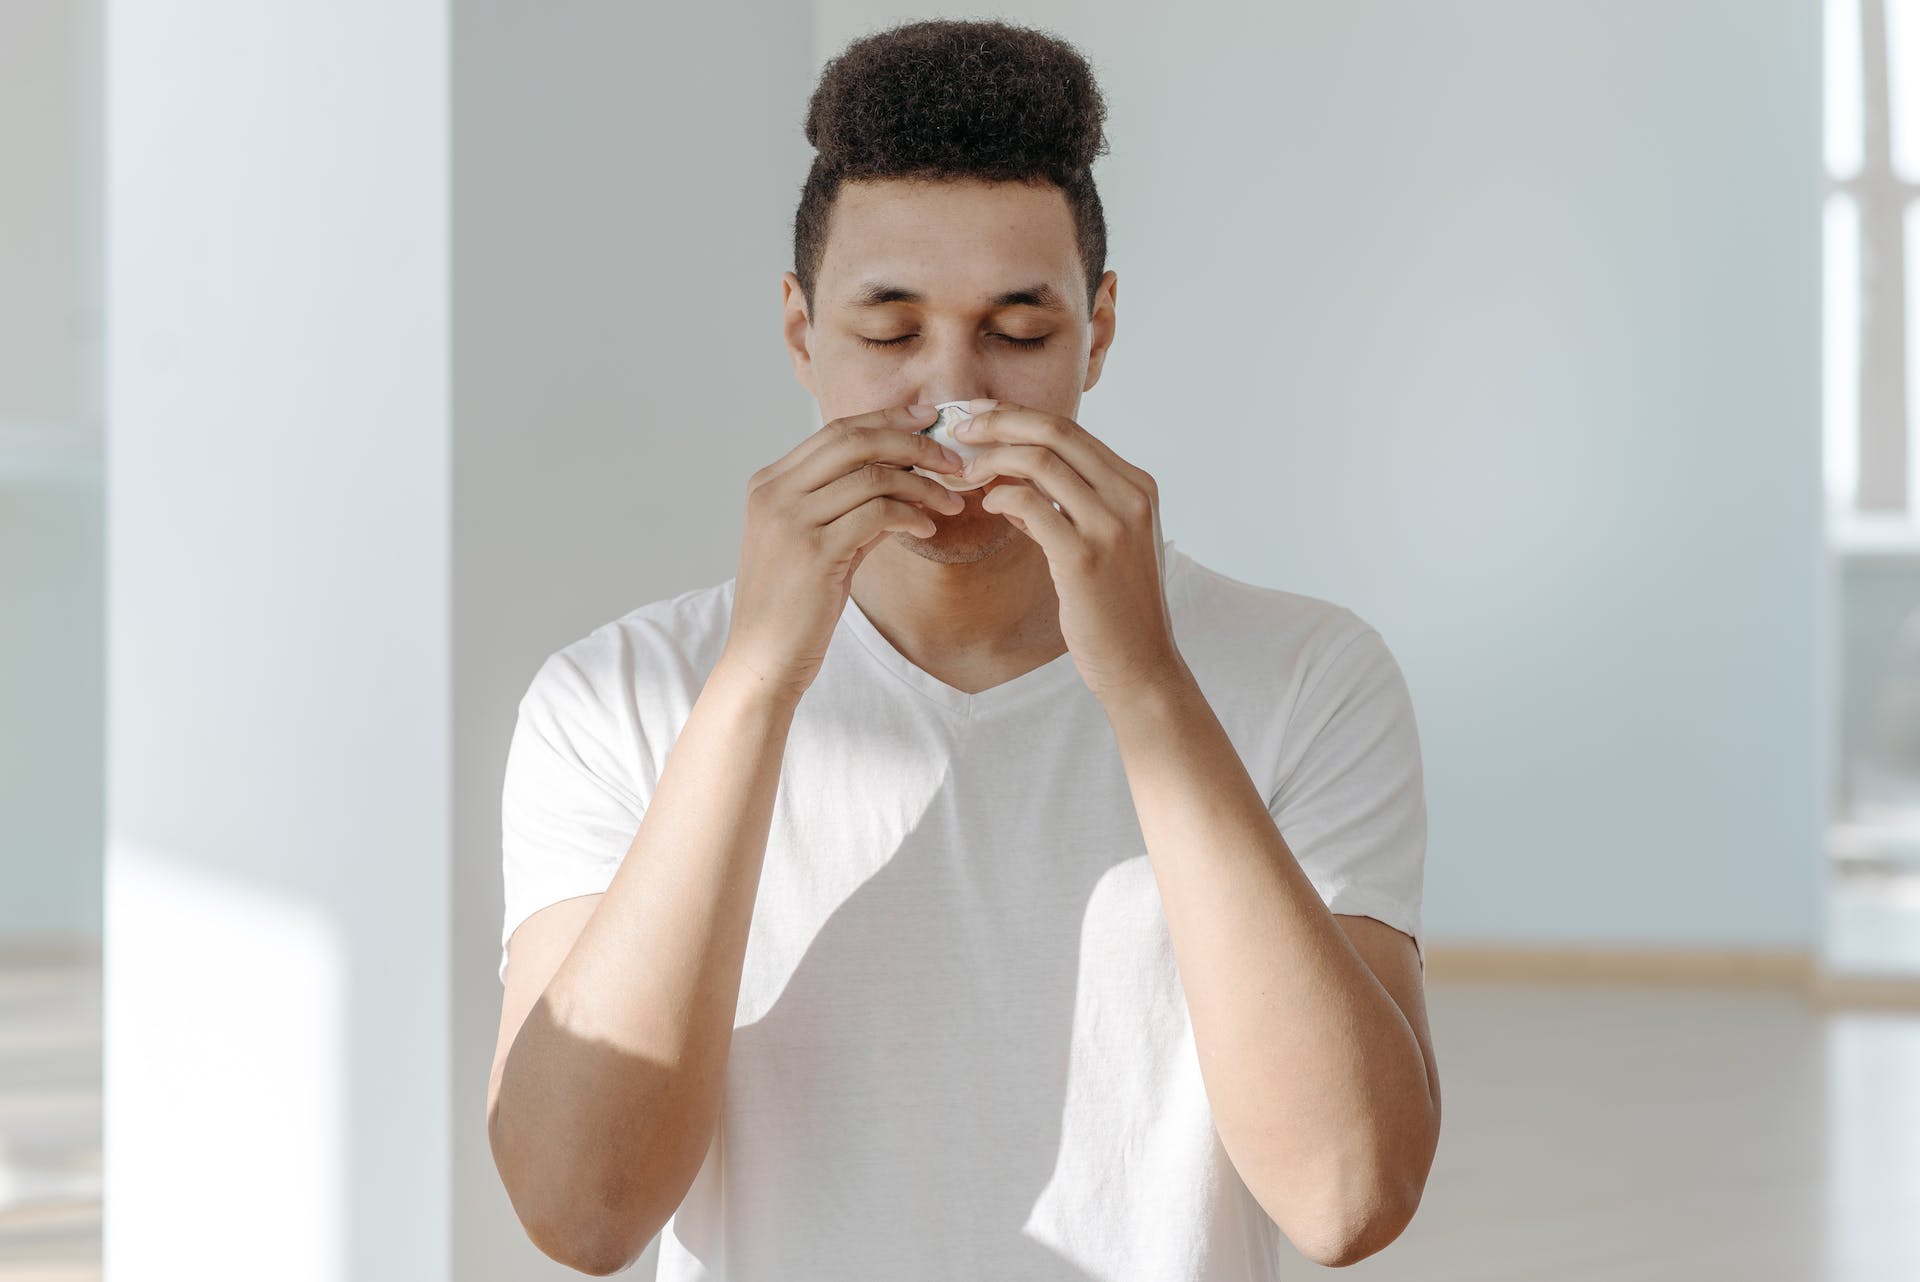 A man wiping his nose | Source: Pexels